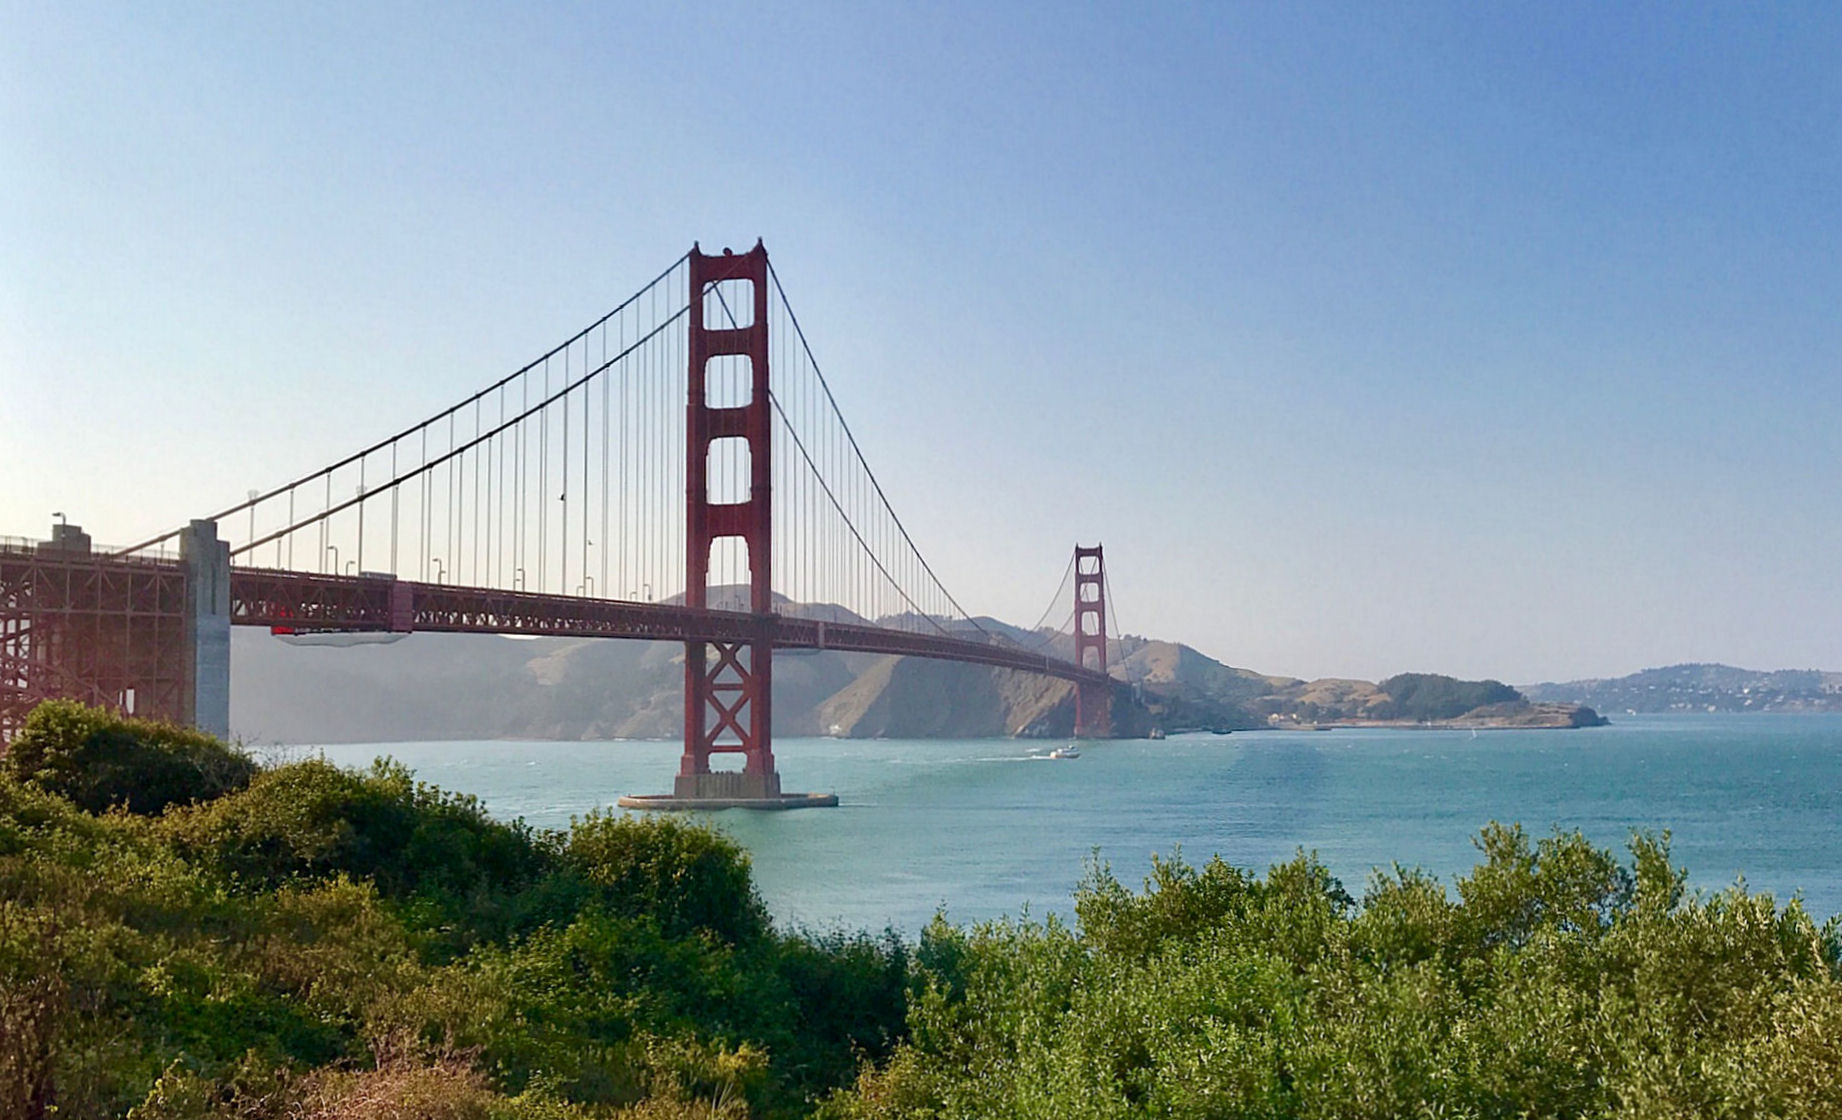 Beautiful, clear view of the Golden Gate Bridge on a late afternoon in August